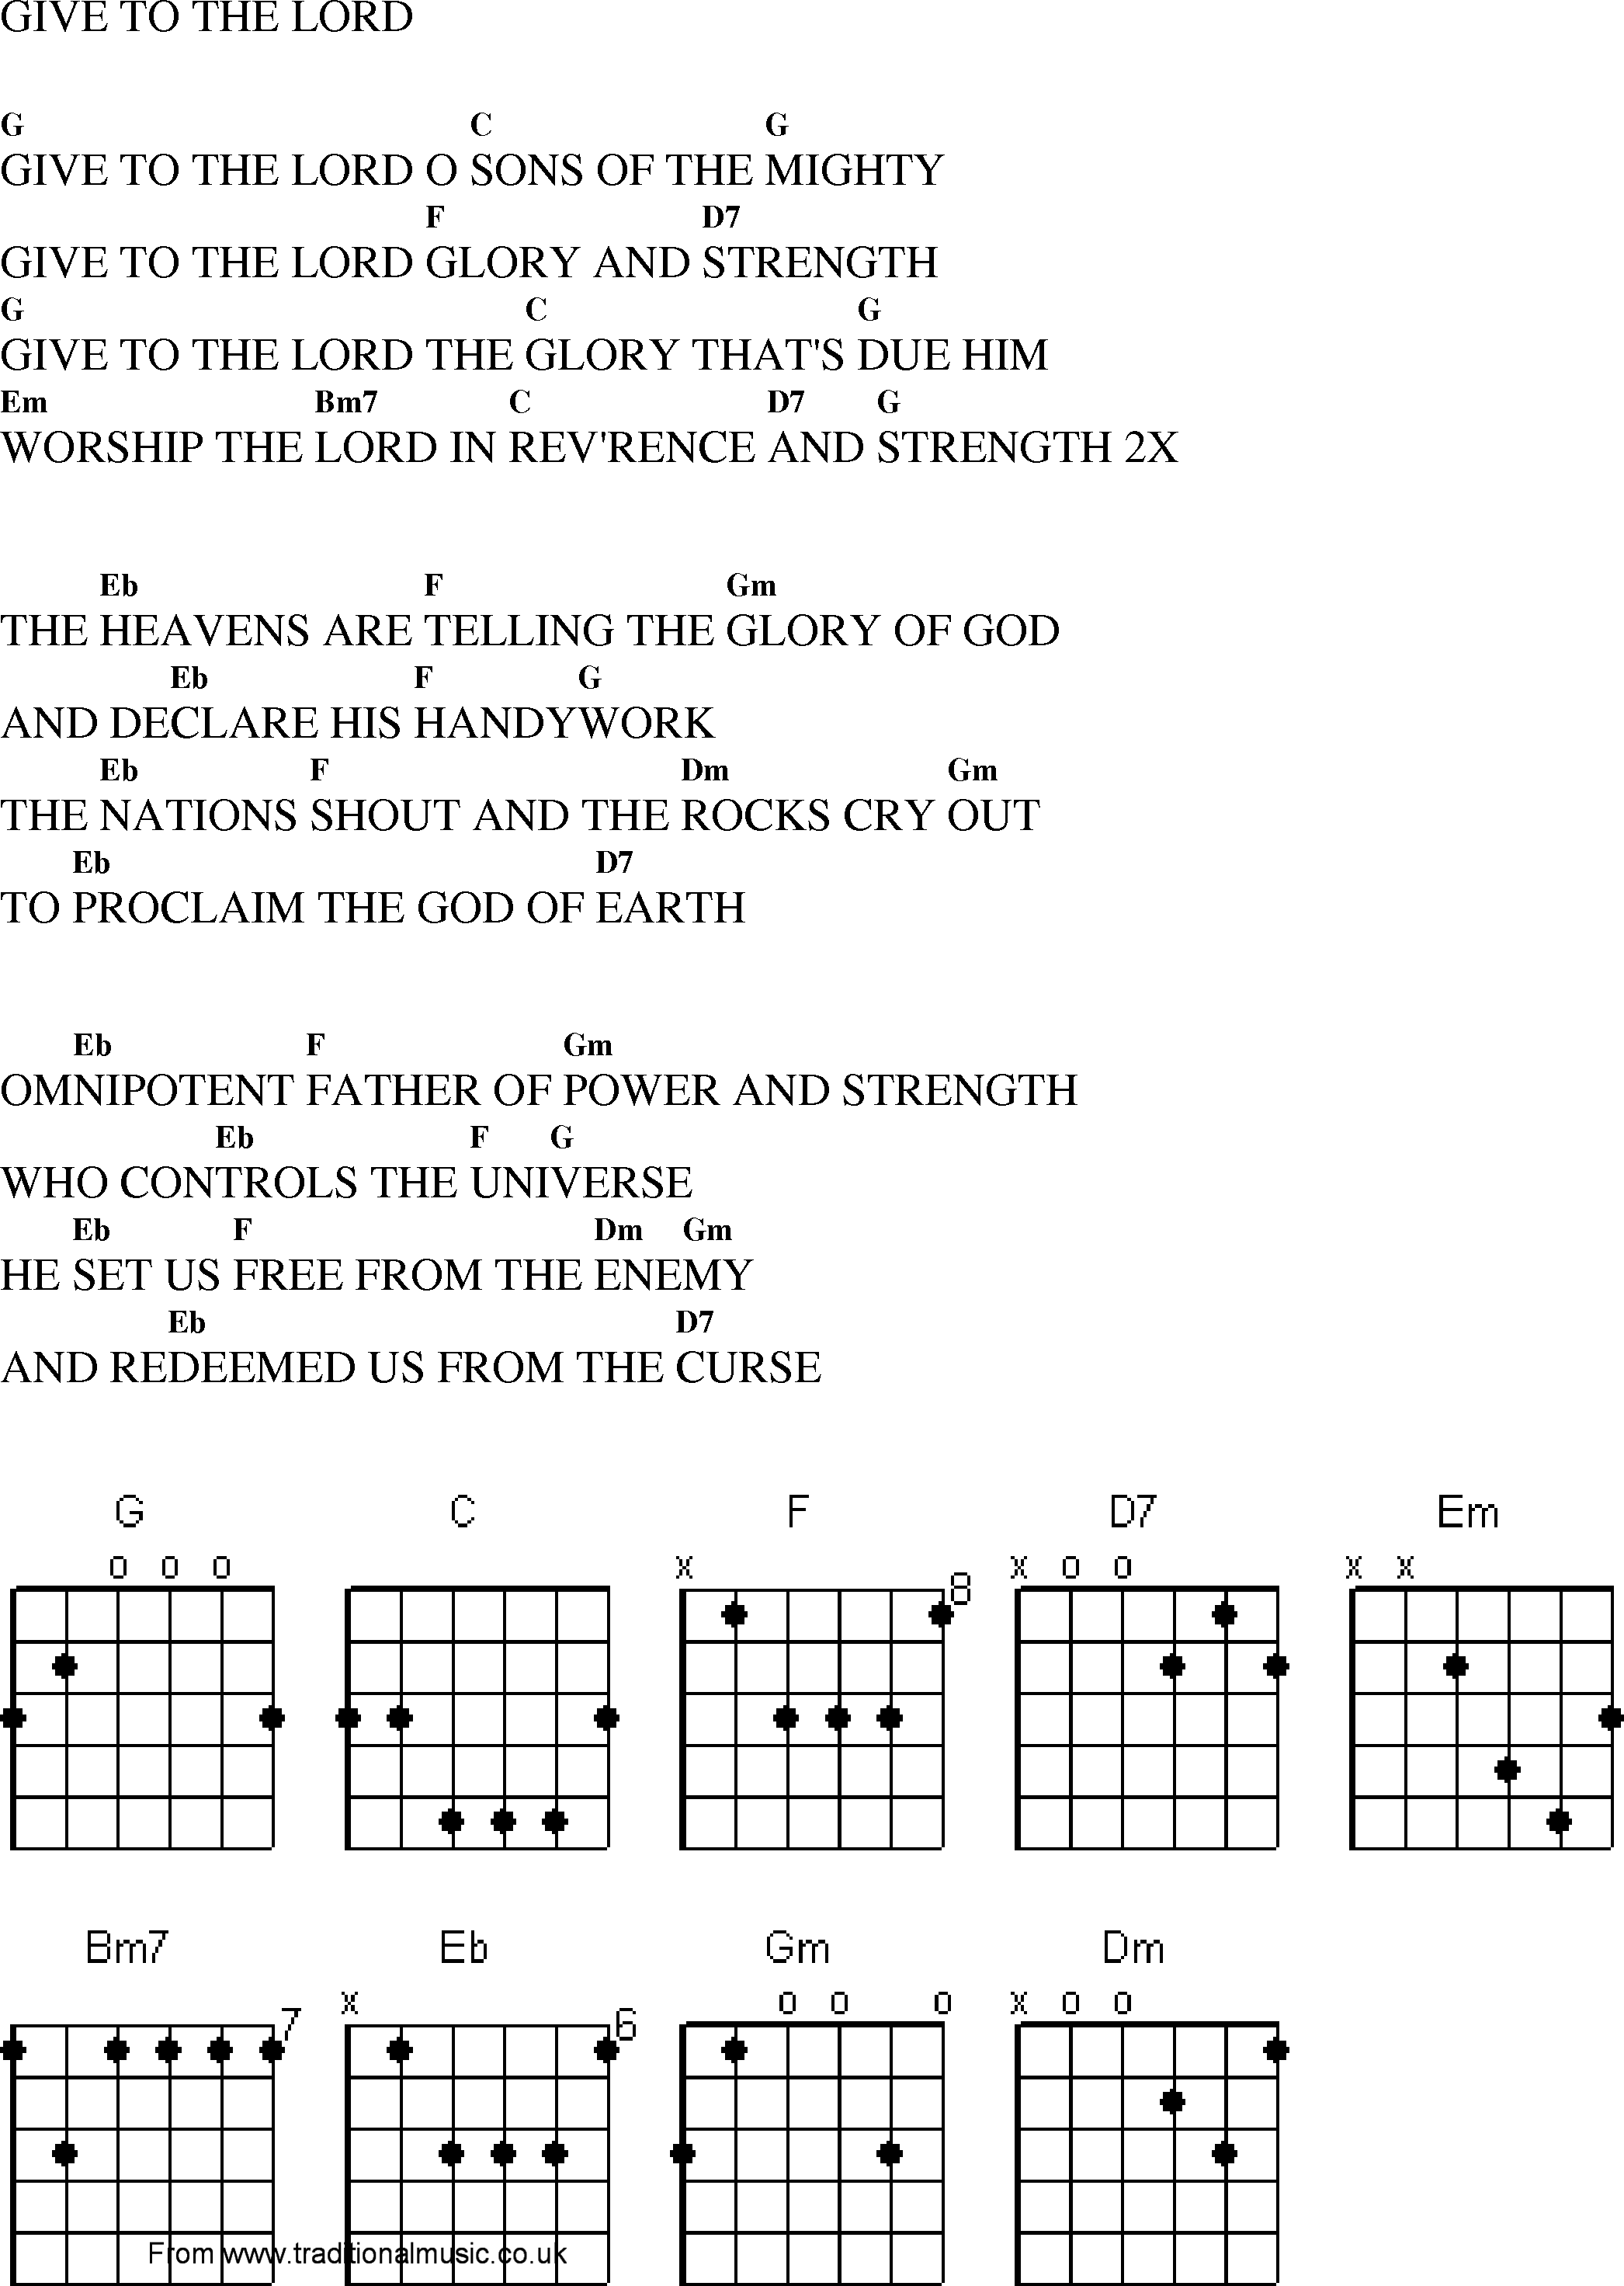 Gospel Song: give_to_the_lord, lyrics and chords.